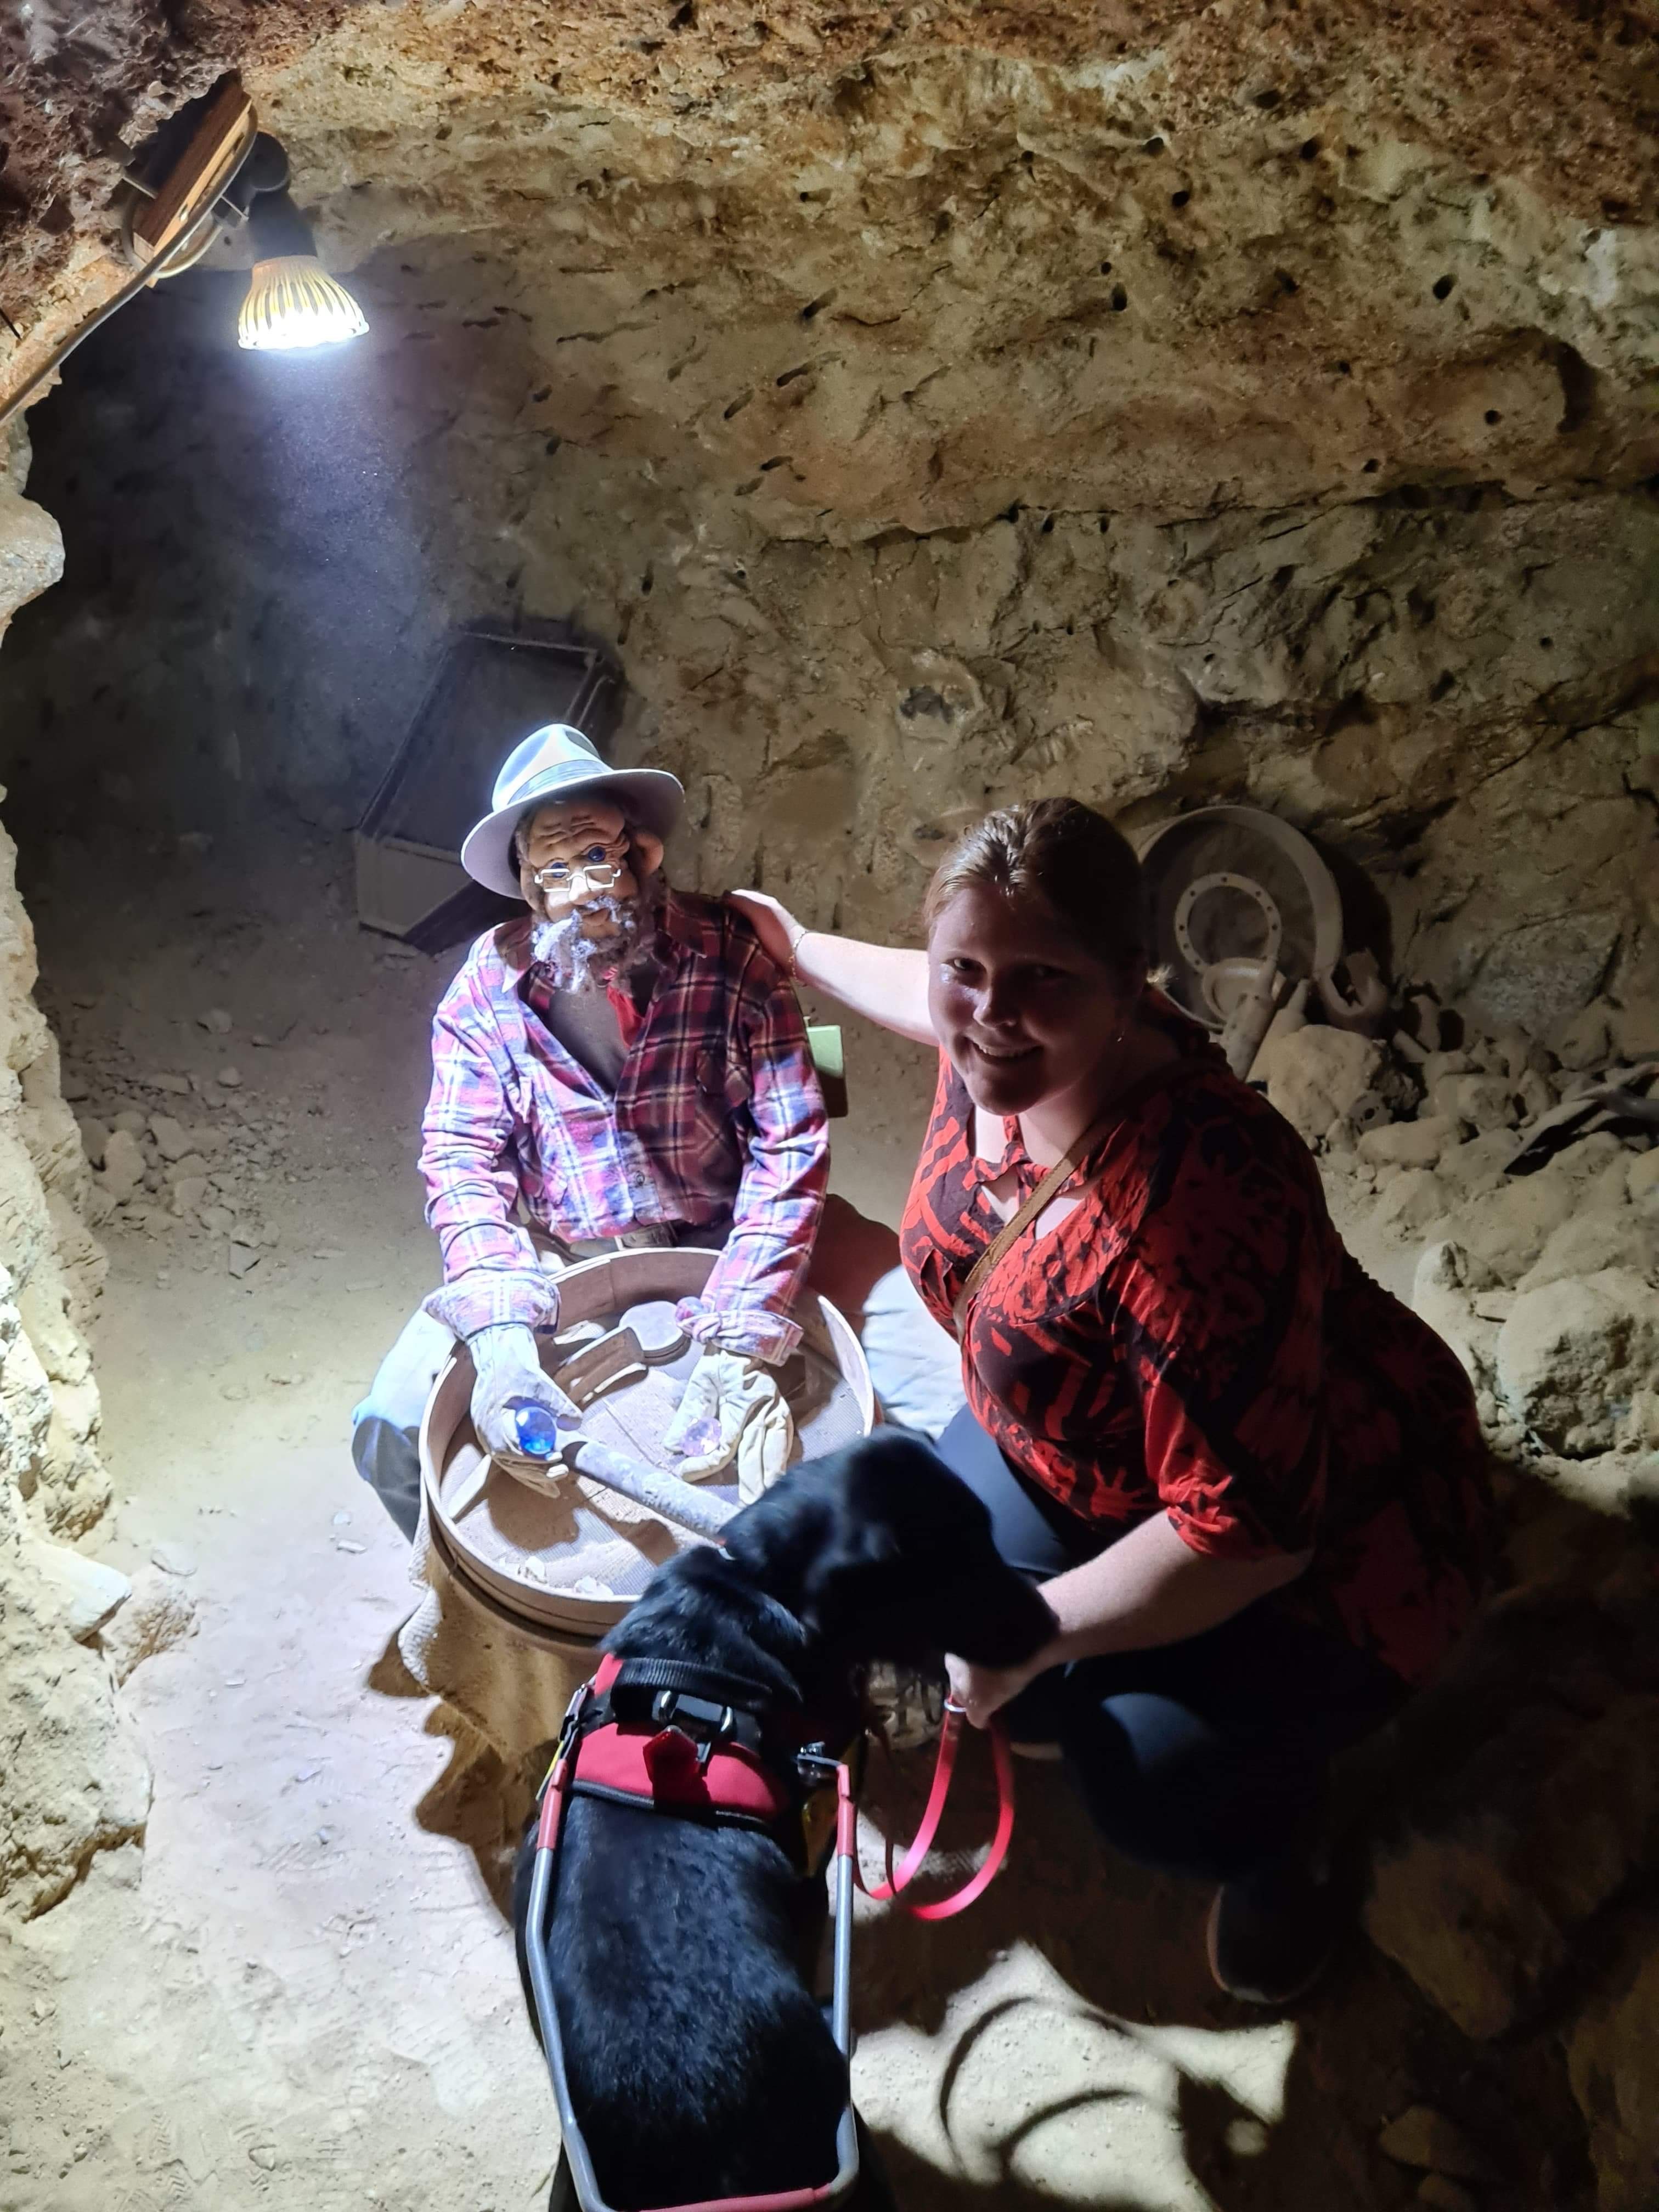 "Isabella being guided through a gem cave with Seeing Eye Dog Penny by her side."